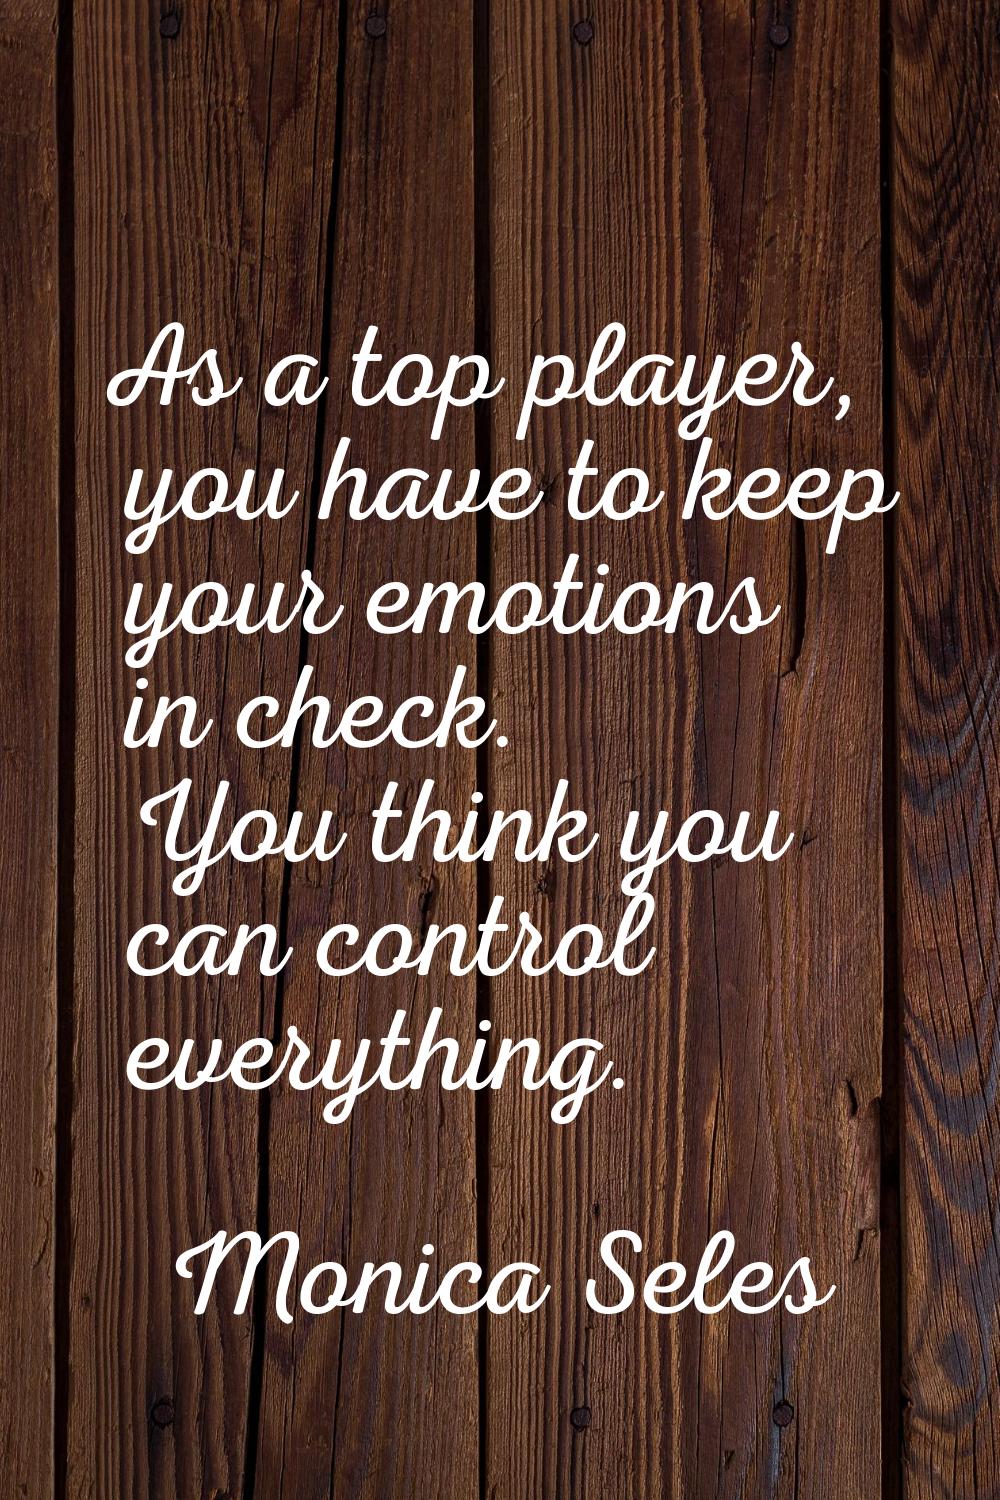 As a top player, you have to keep your emotions in check. You think you can control everything.